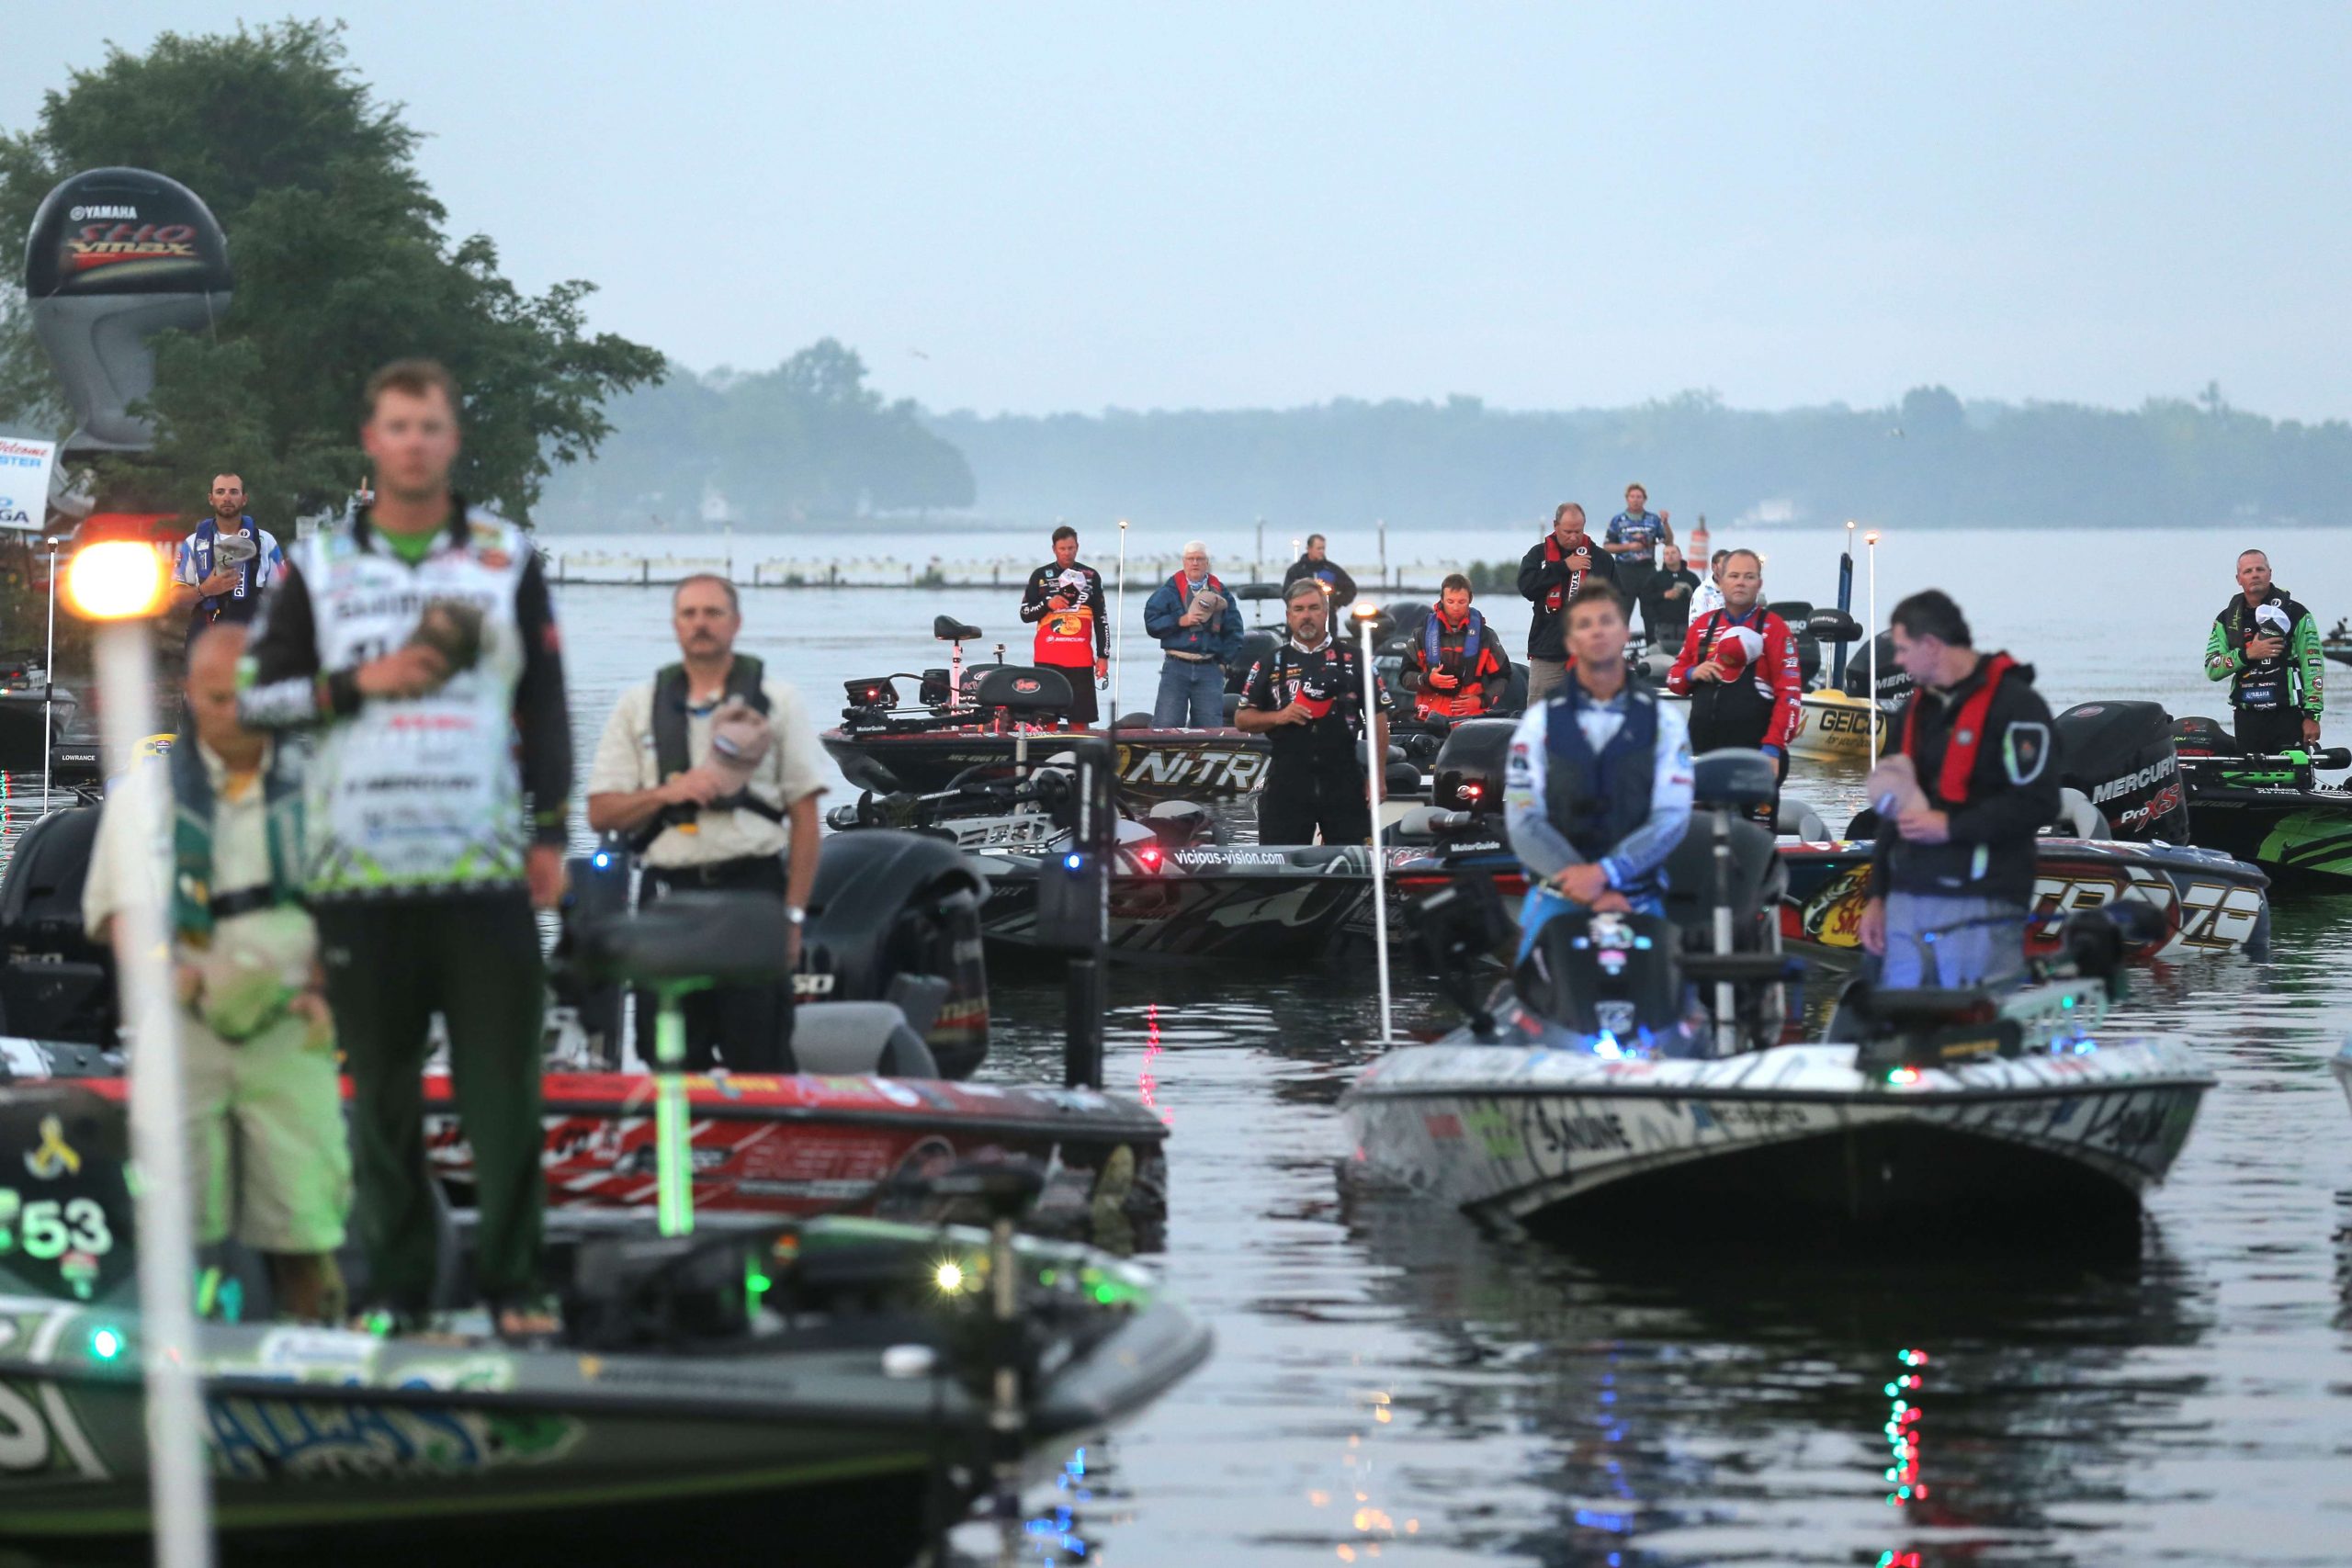 KVD finds himself in the middle of the pack, in this pic and in this event. VanDam needs a solid day to keep his Classic hopes alive. 